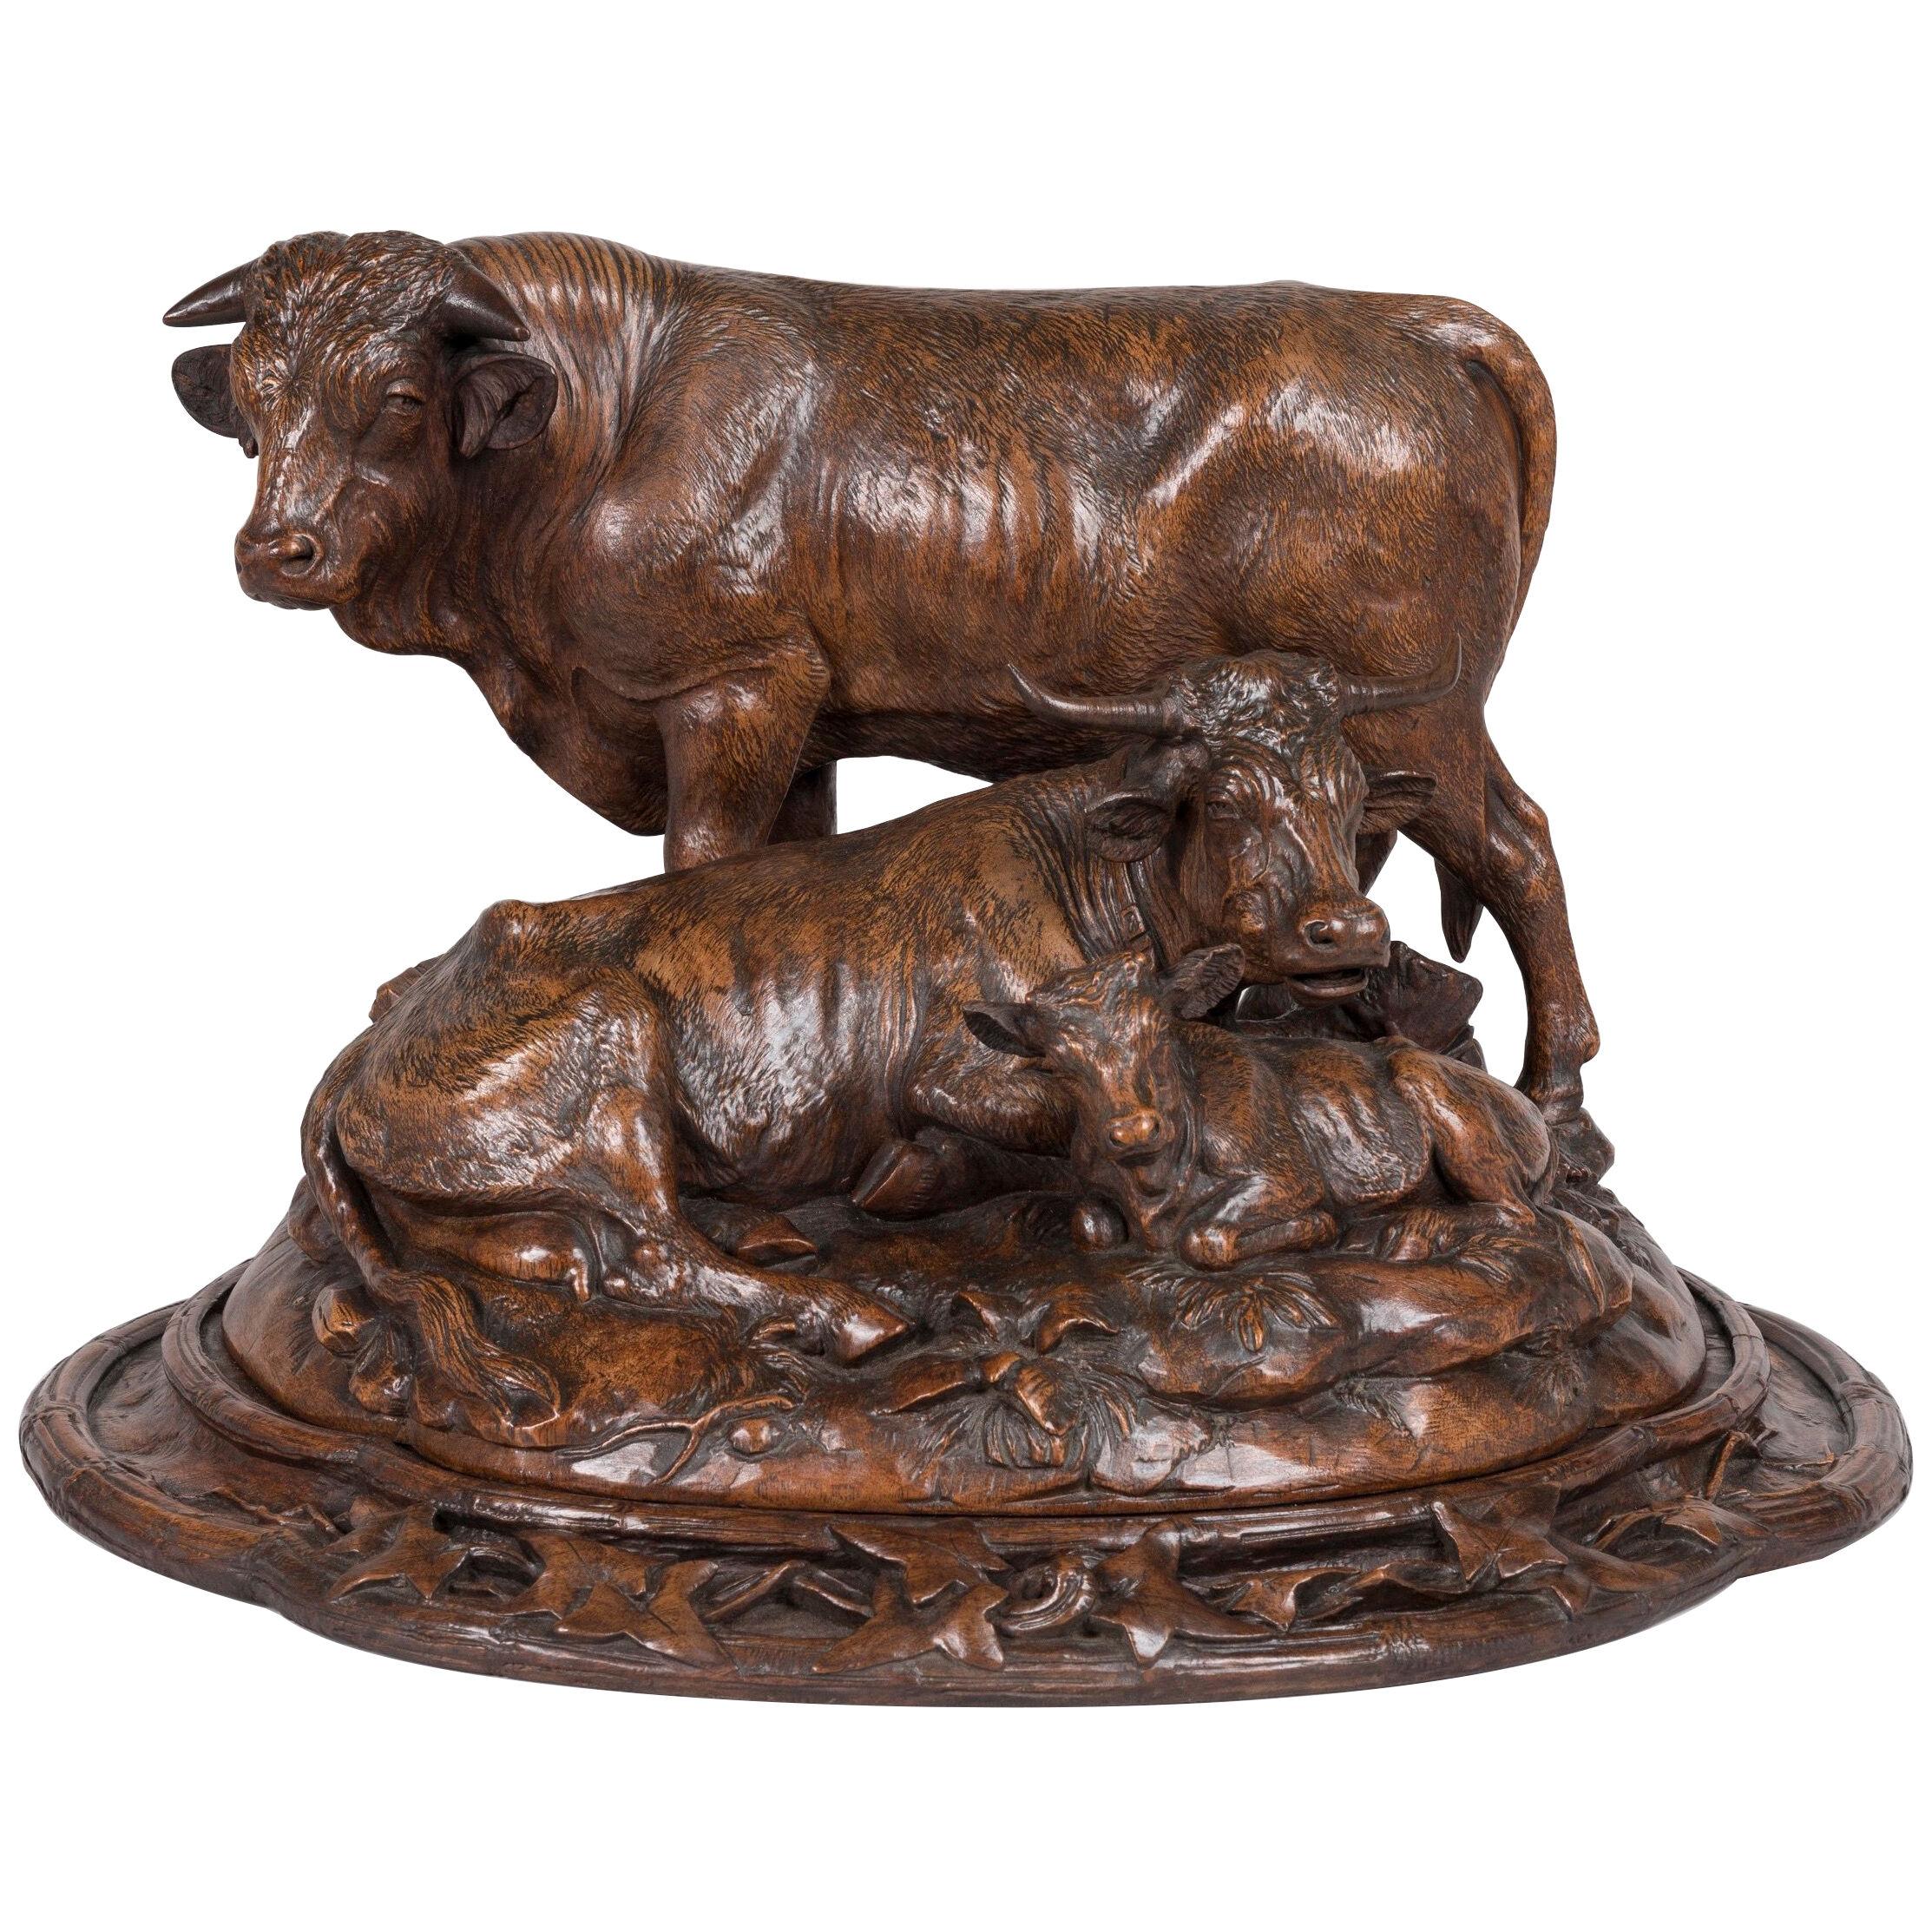 A 19th Century Swiss Black Forest Carved Cattle Group